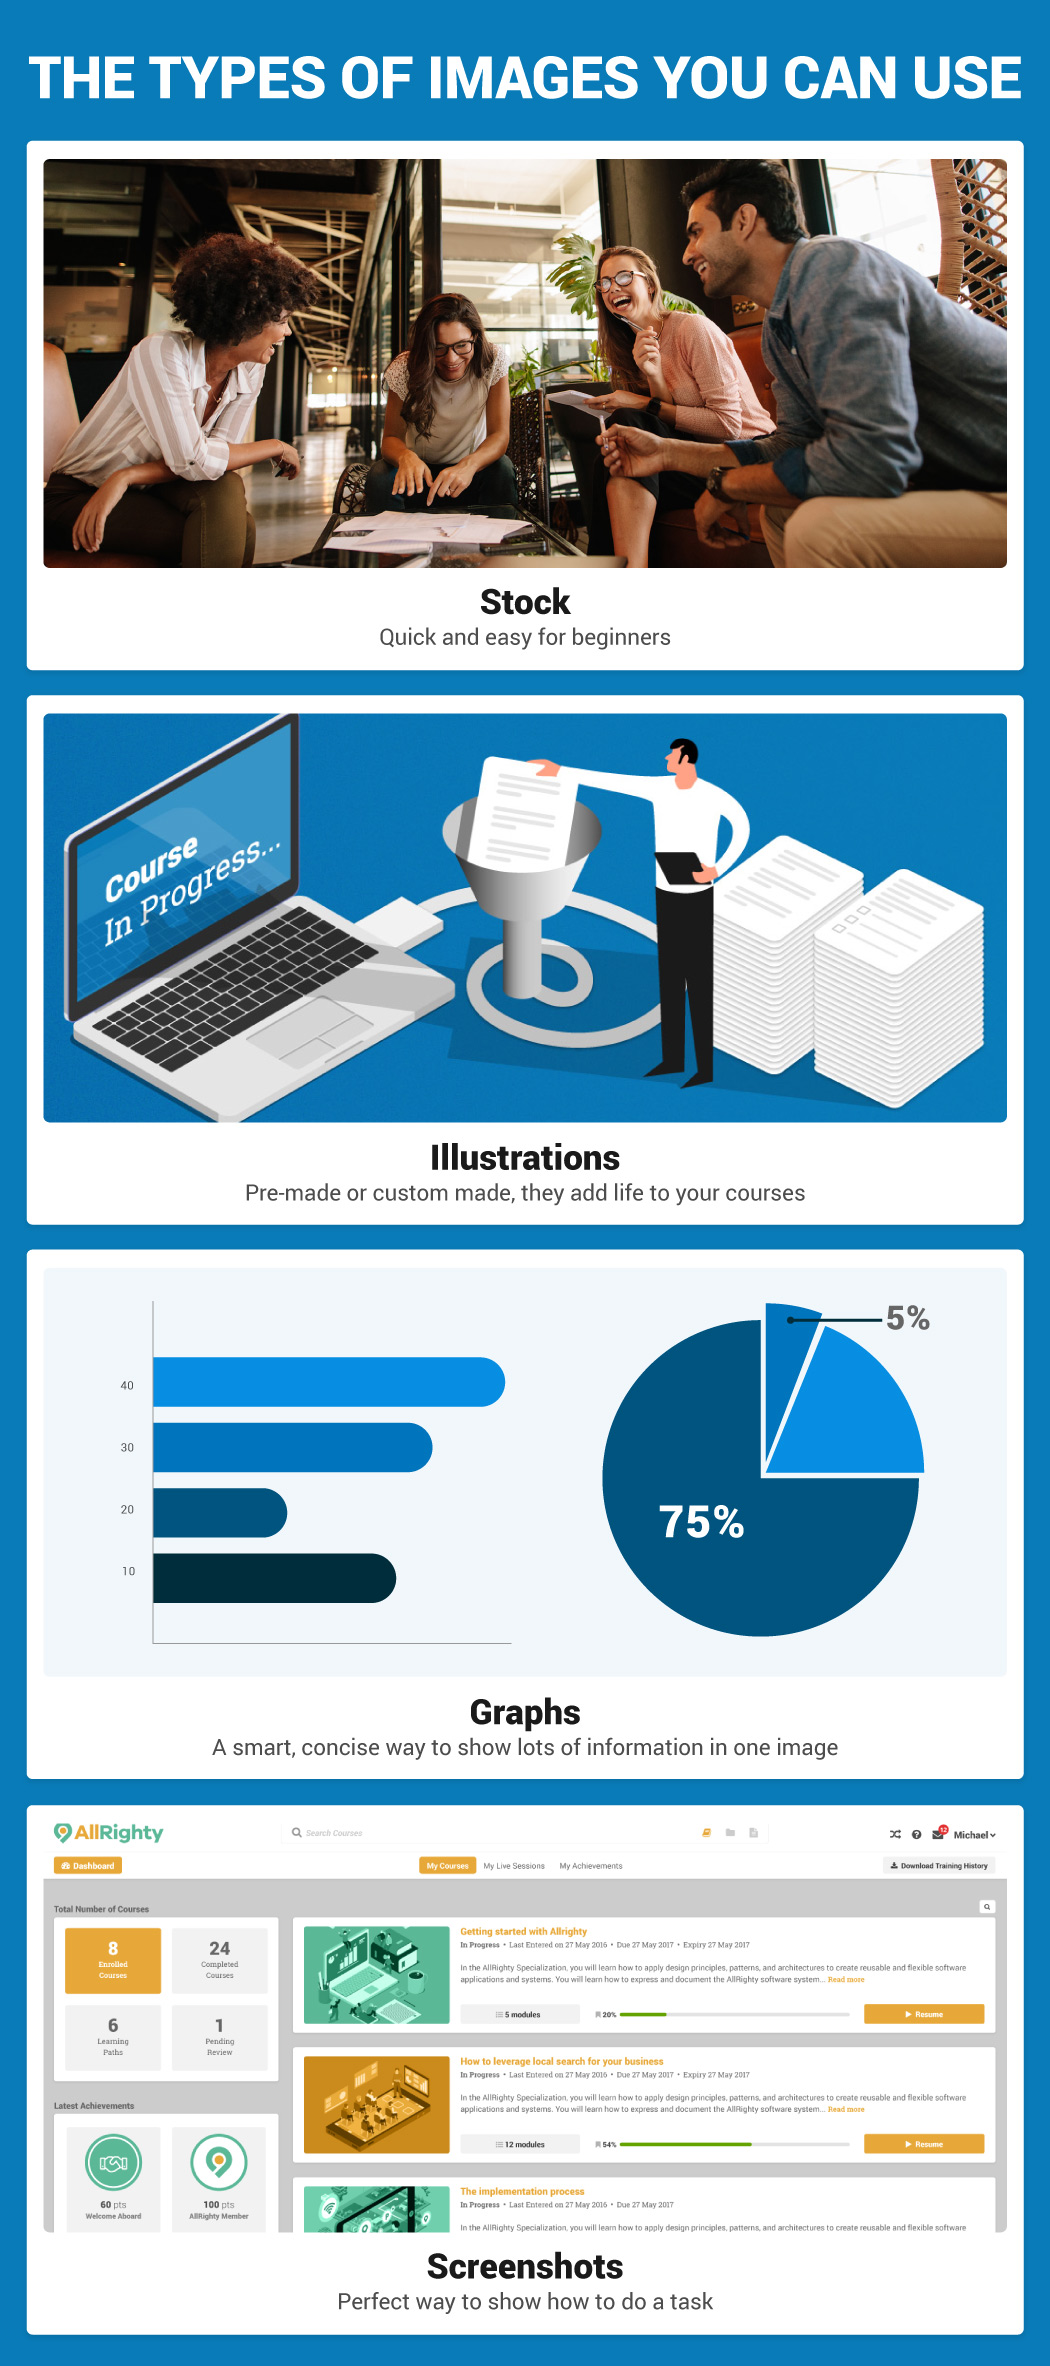  Image elearning infographic